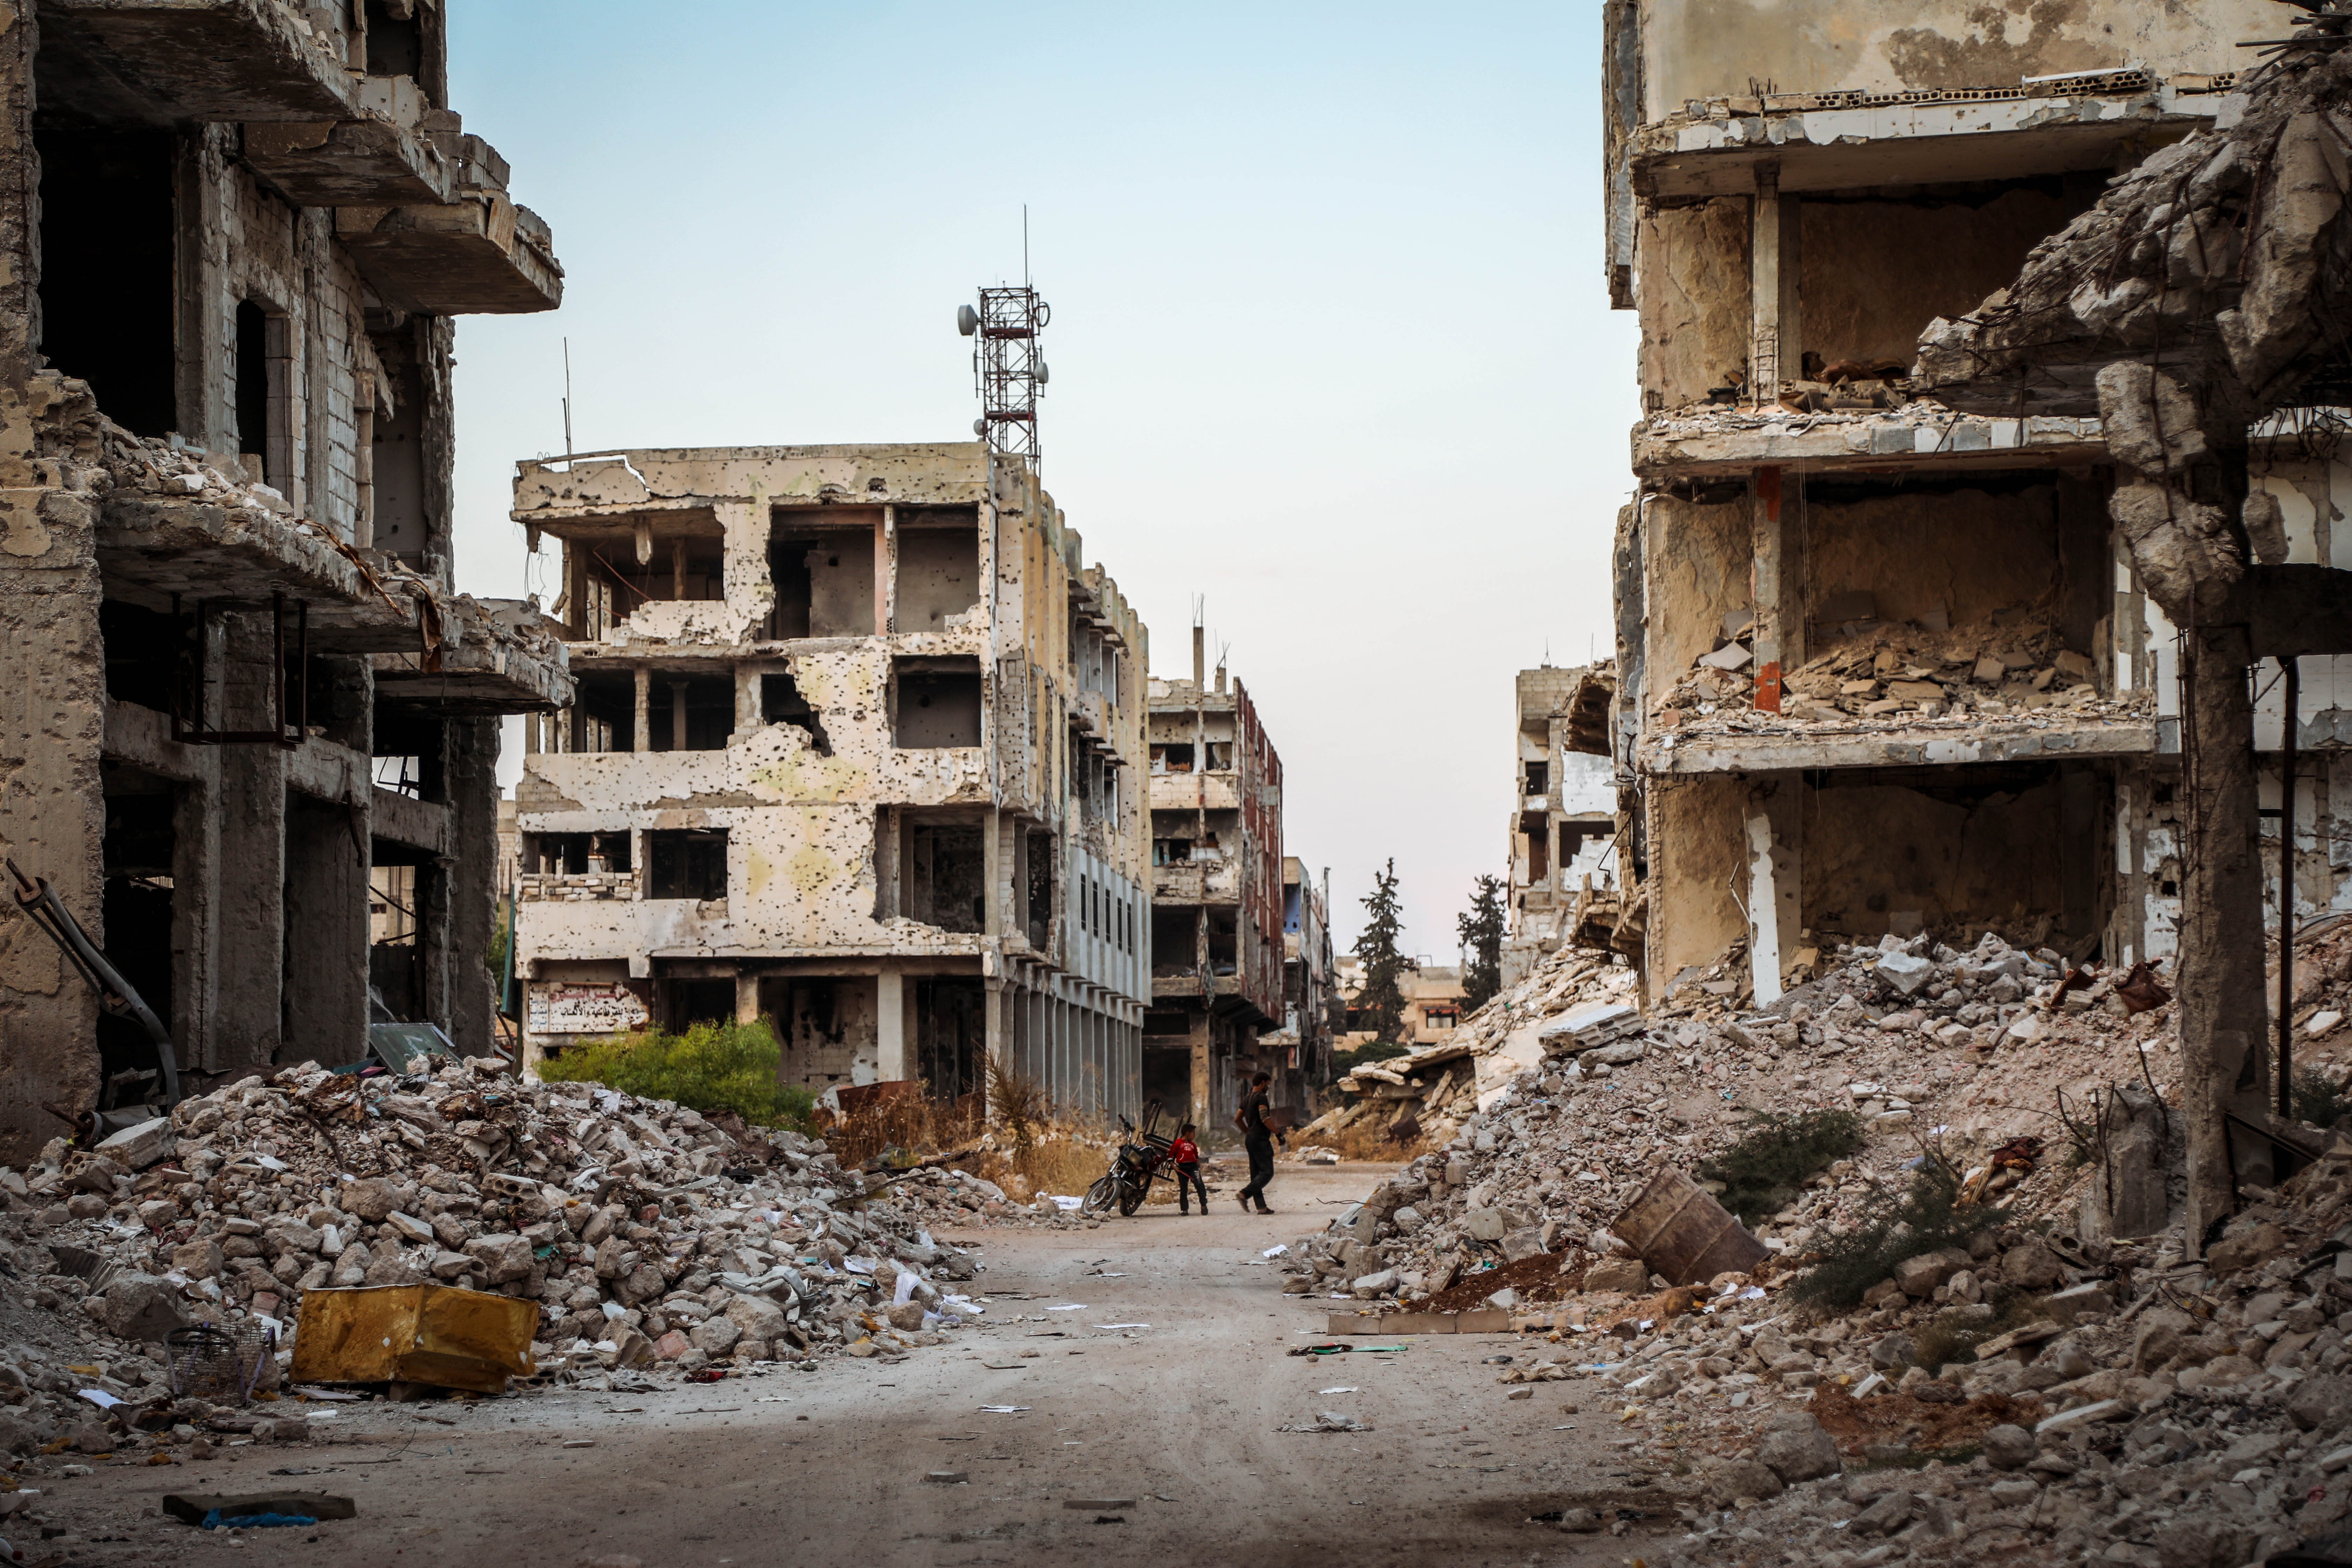 Online roundtable event to discuss Syrian crisis as special journal issue launched